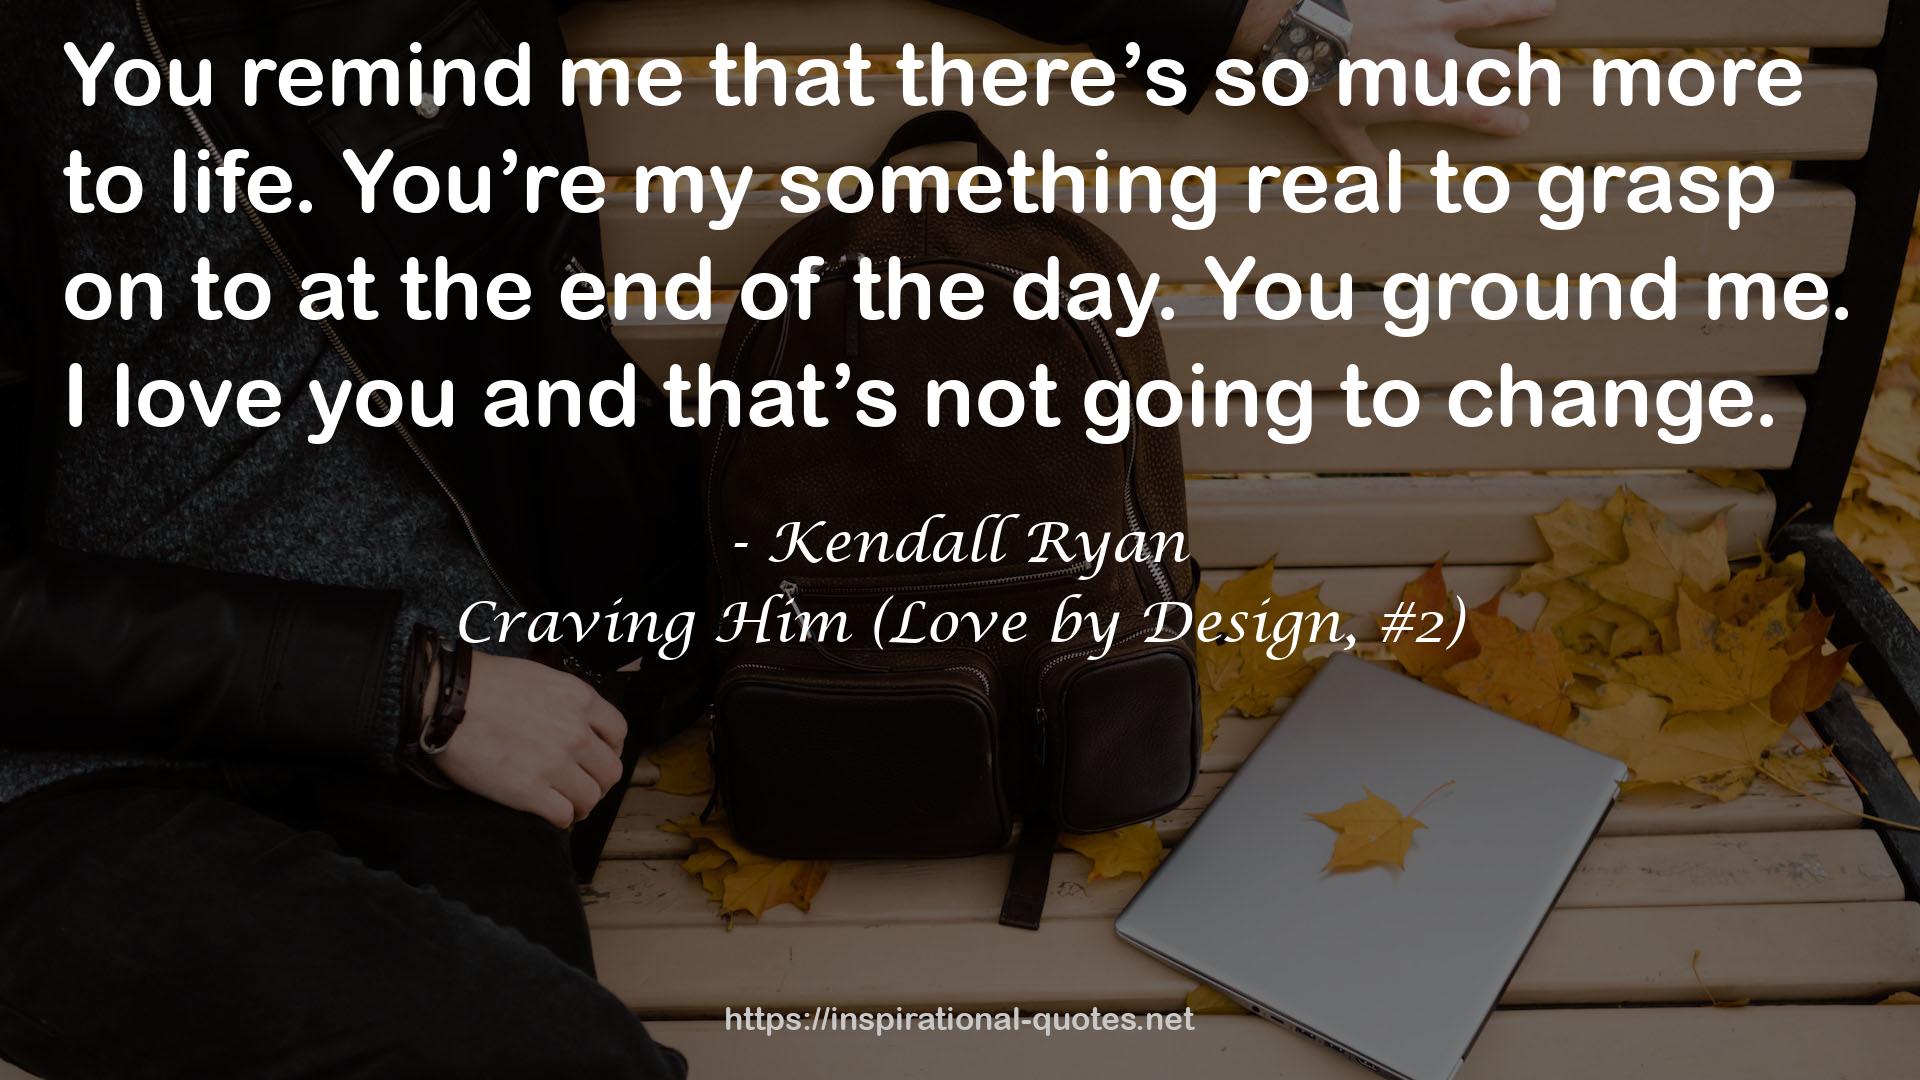 Craving Him (Love by Design, #2) QUOTES